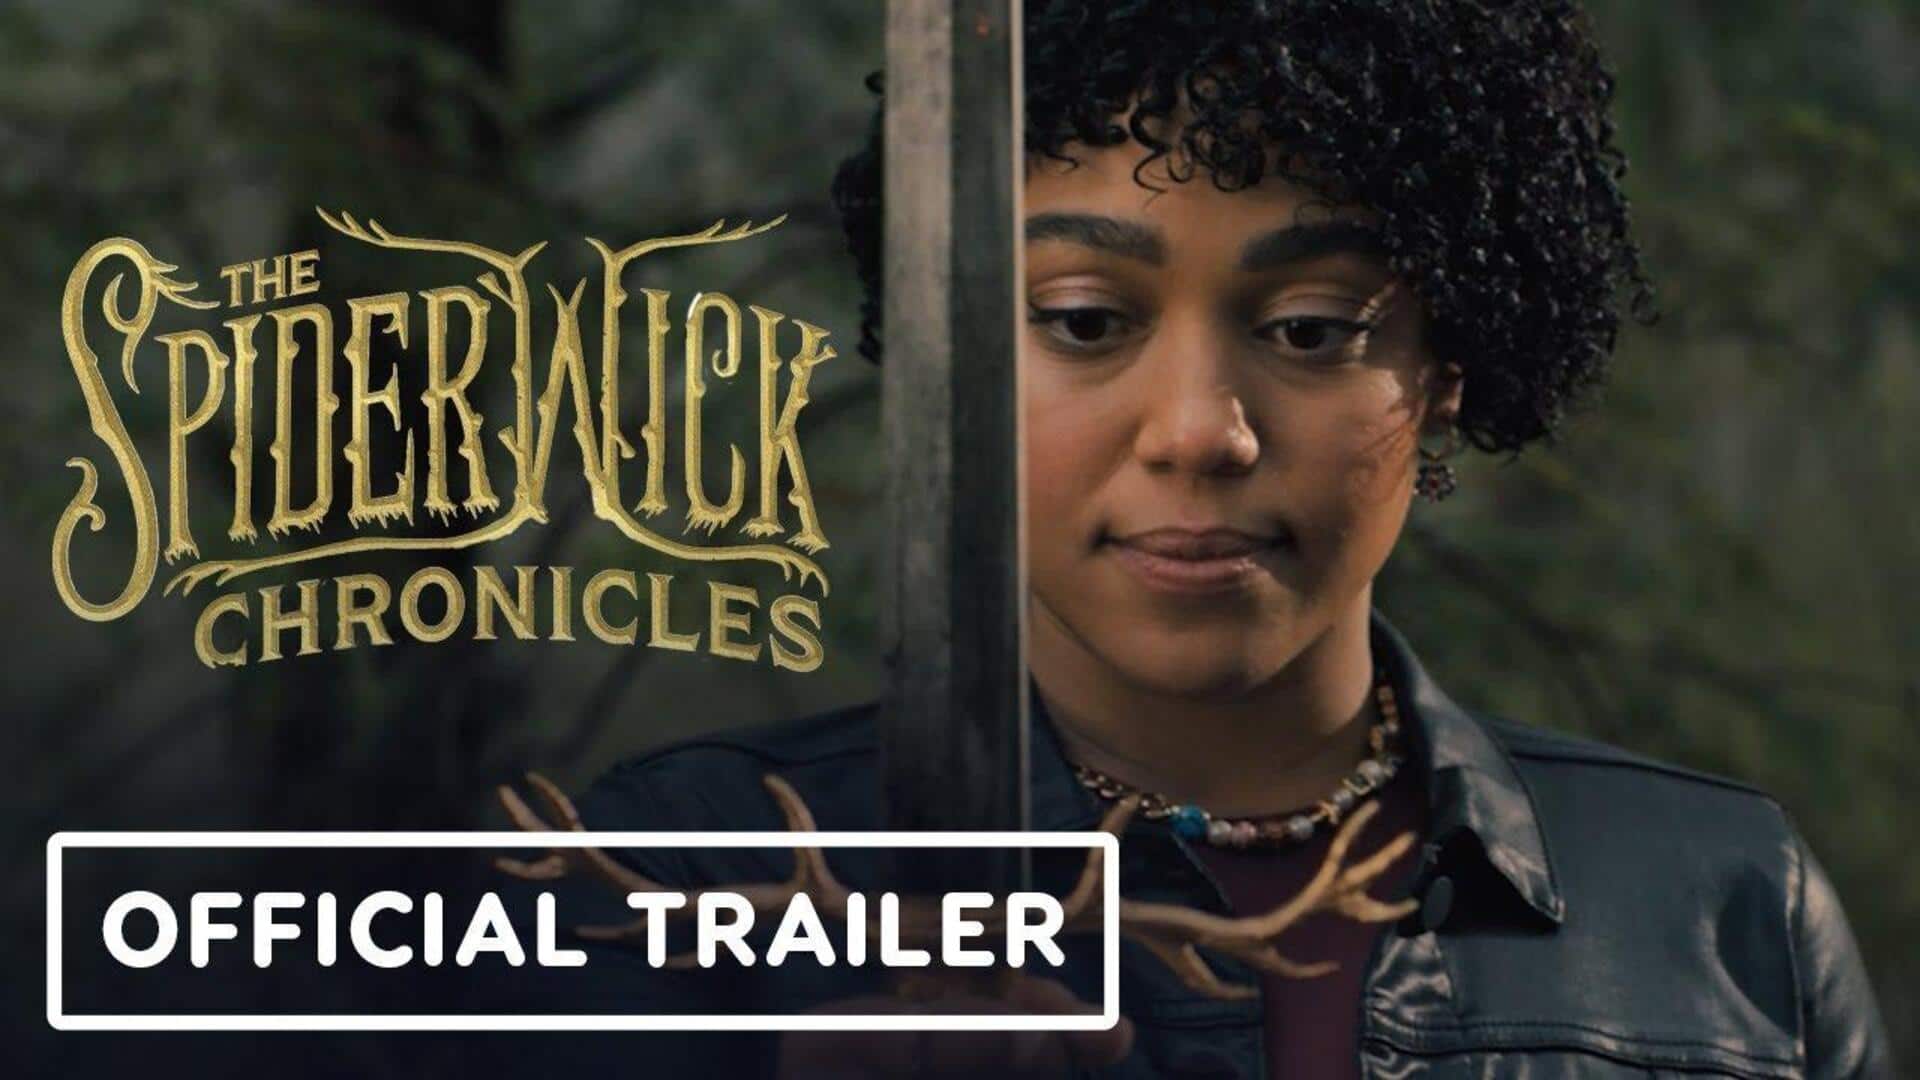 'The Spiderwick Chronicles': Cast, trailer, and premiere date unveiled